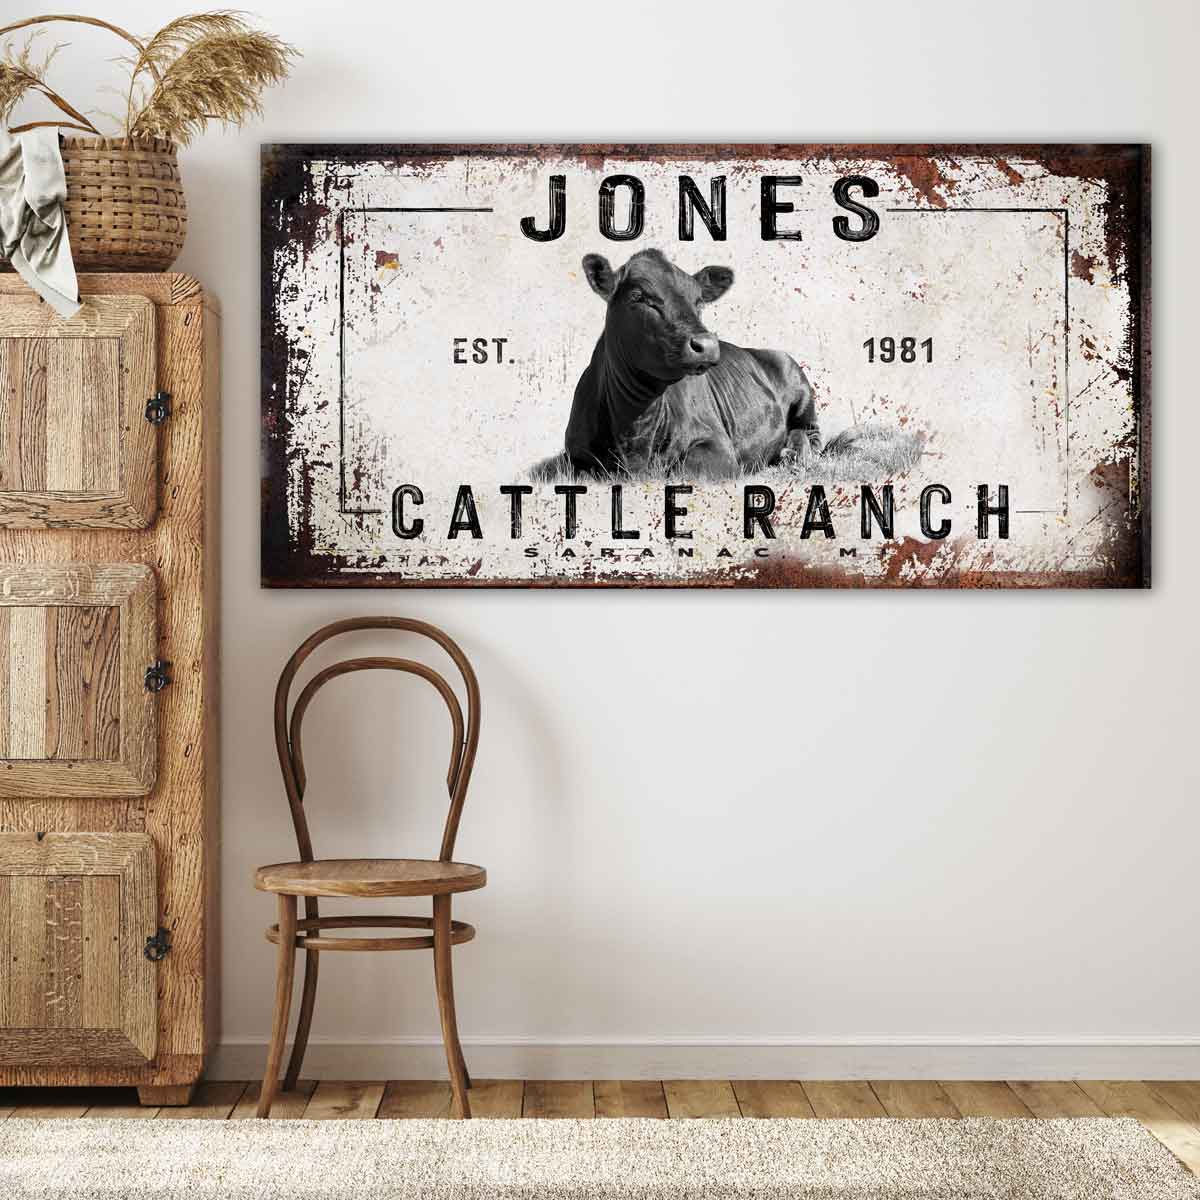 Cattle Ranch Cow Sign with rustic distressed frame with rusty edges. Cow and year established [Family Name] Cattle Ranch